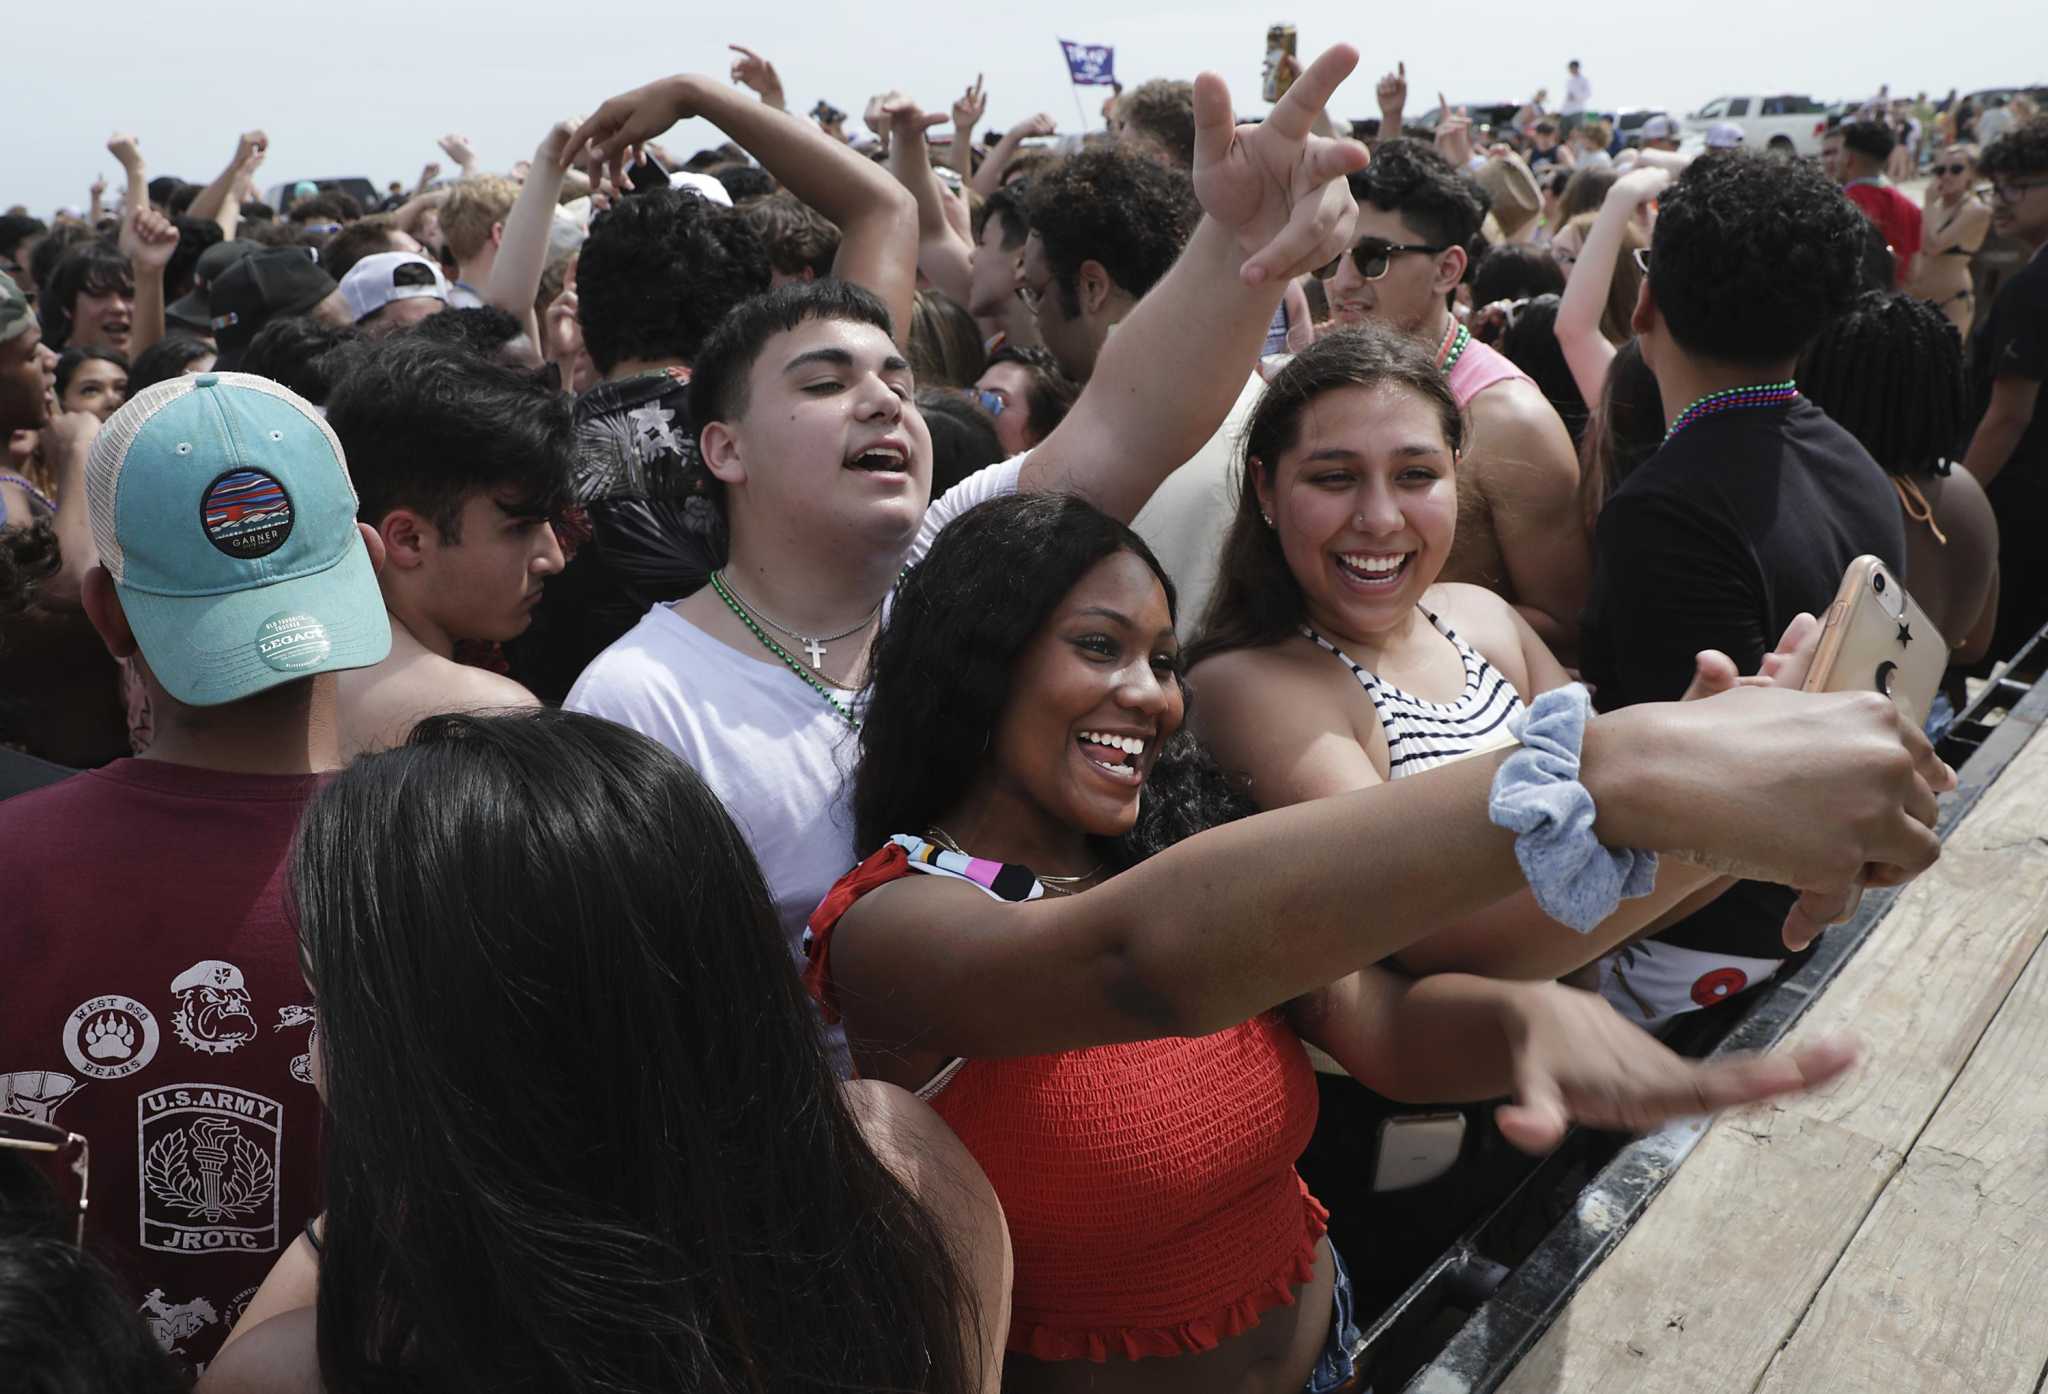 As pandemic continues, some Texas colleges scrap spring break plans